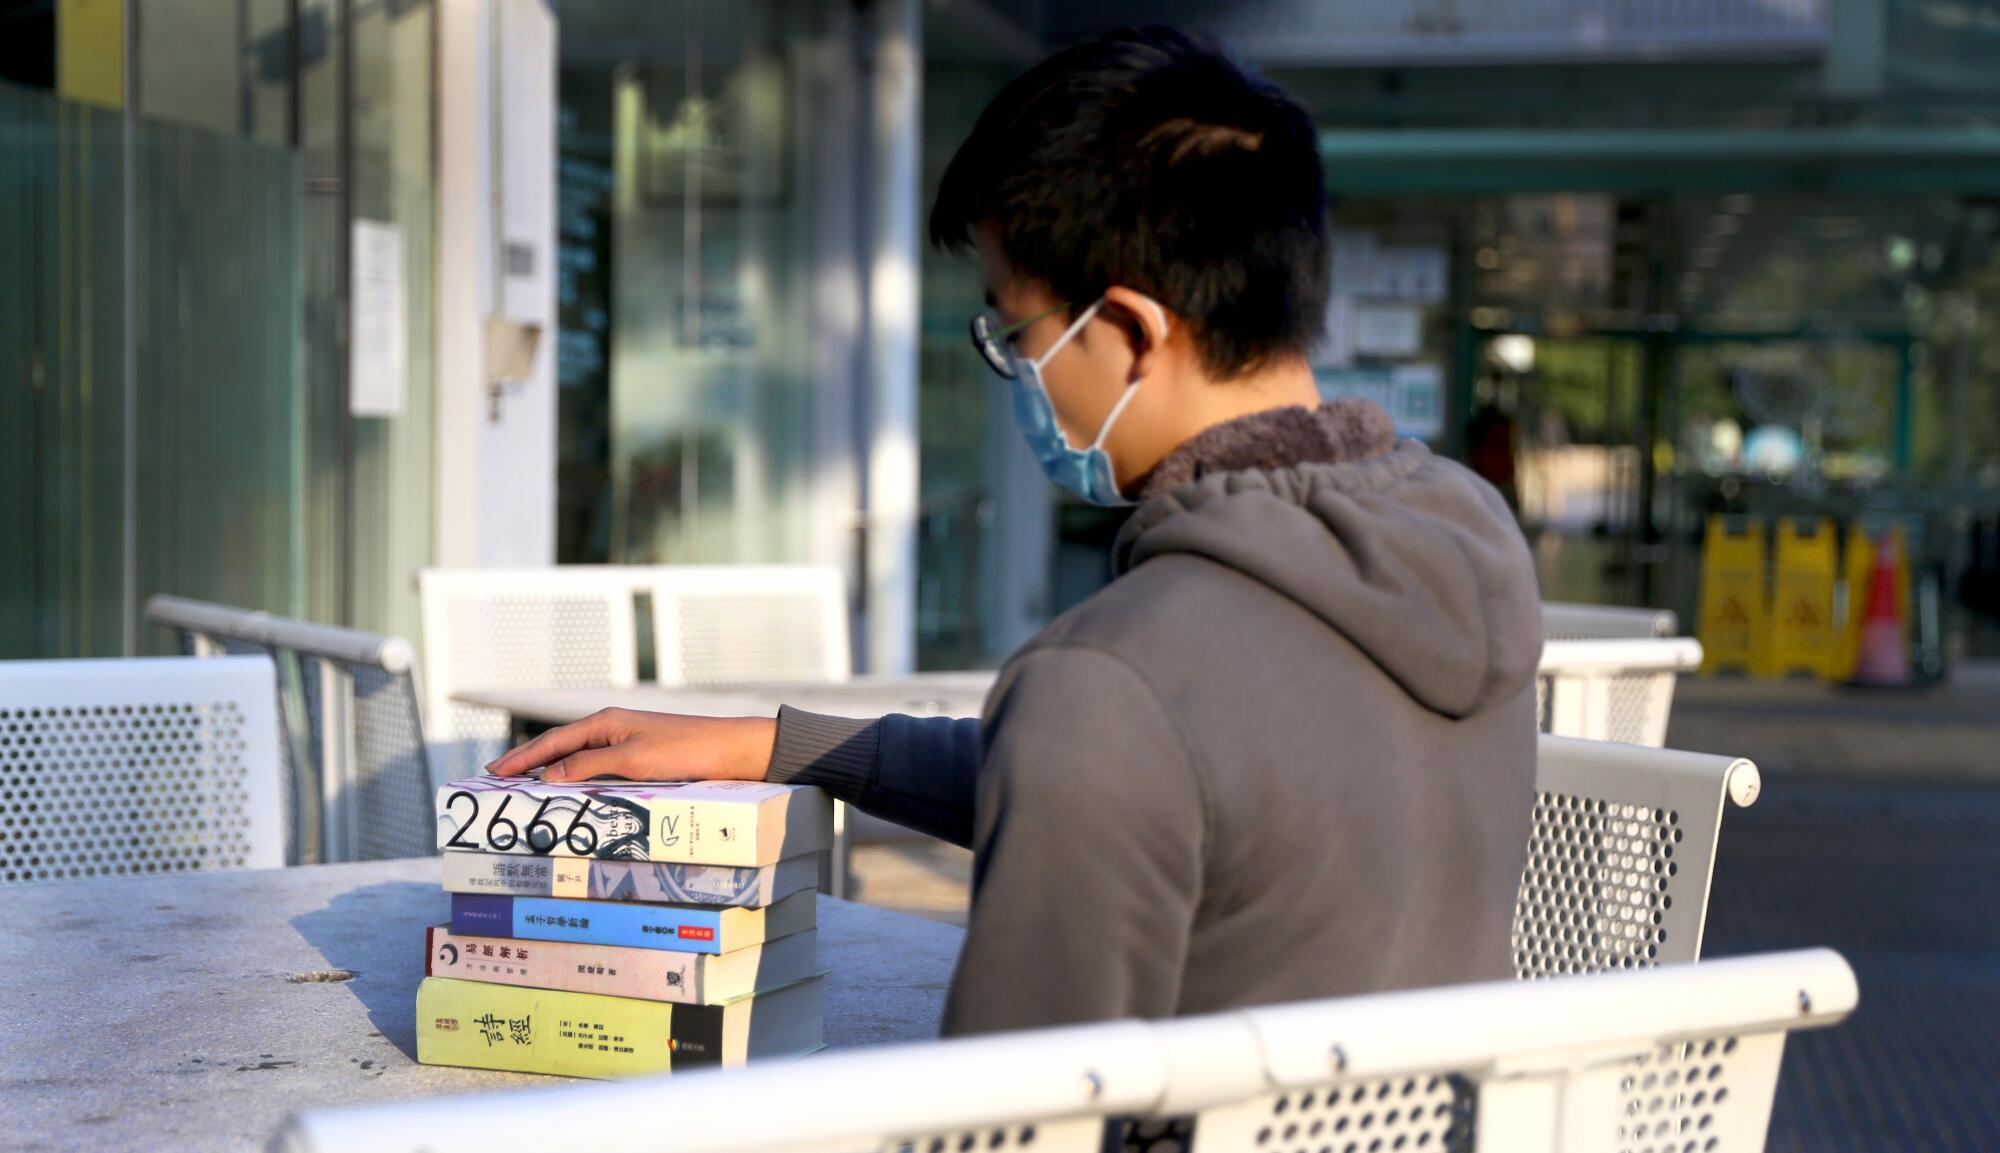 A student sits at a table with a stack of books in front of him.